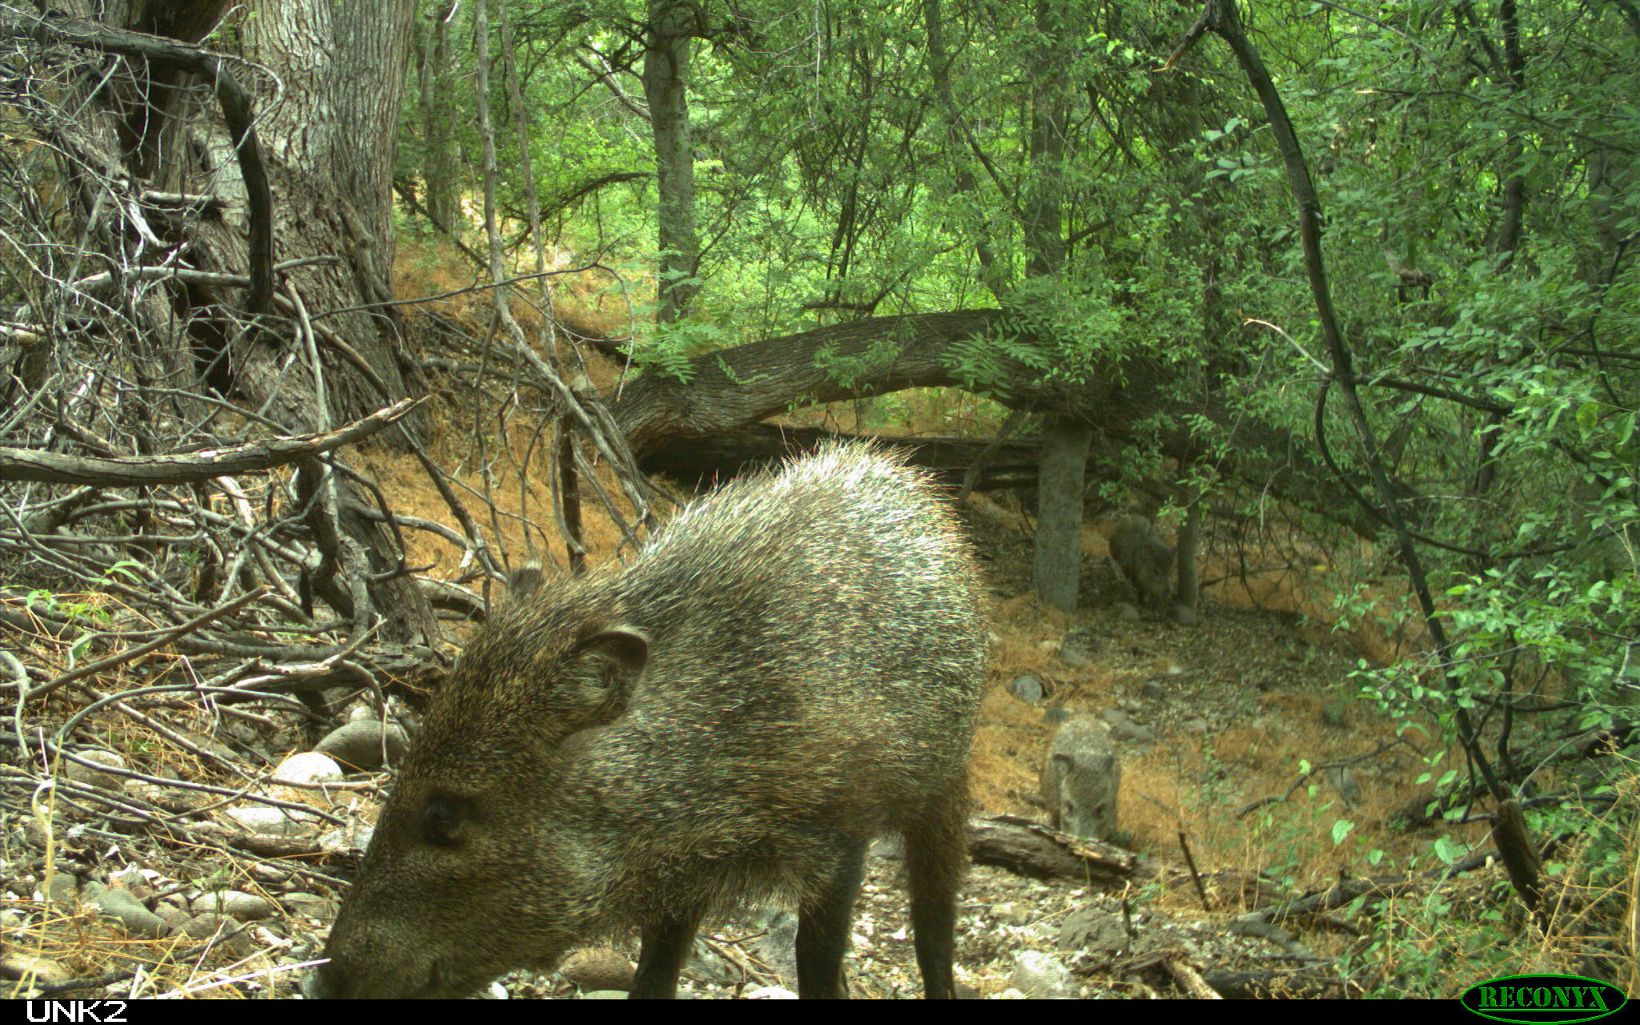 Collared peccary Also known as javelinas, peccaries often cool off in wooded areas during the hottest part of the day. It’s also a good place to forage for plants. © Keith Geluso/The Nature Conservancy